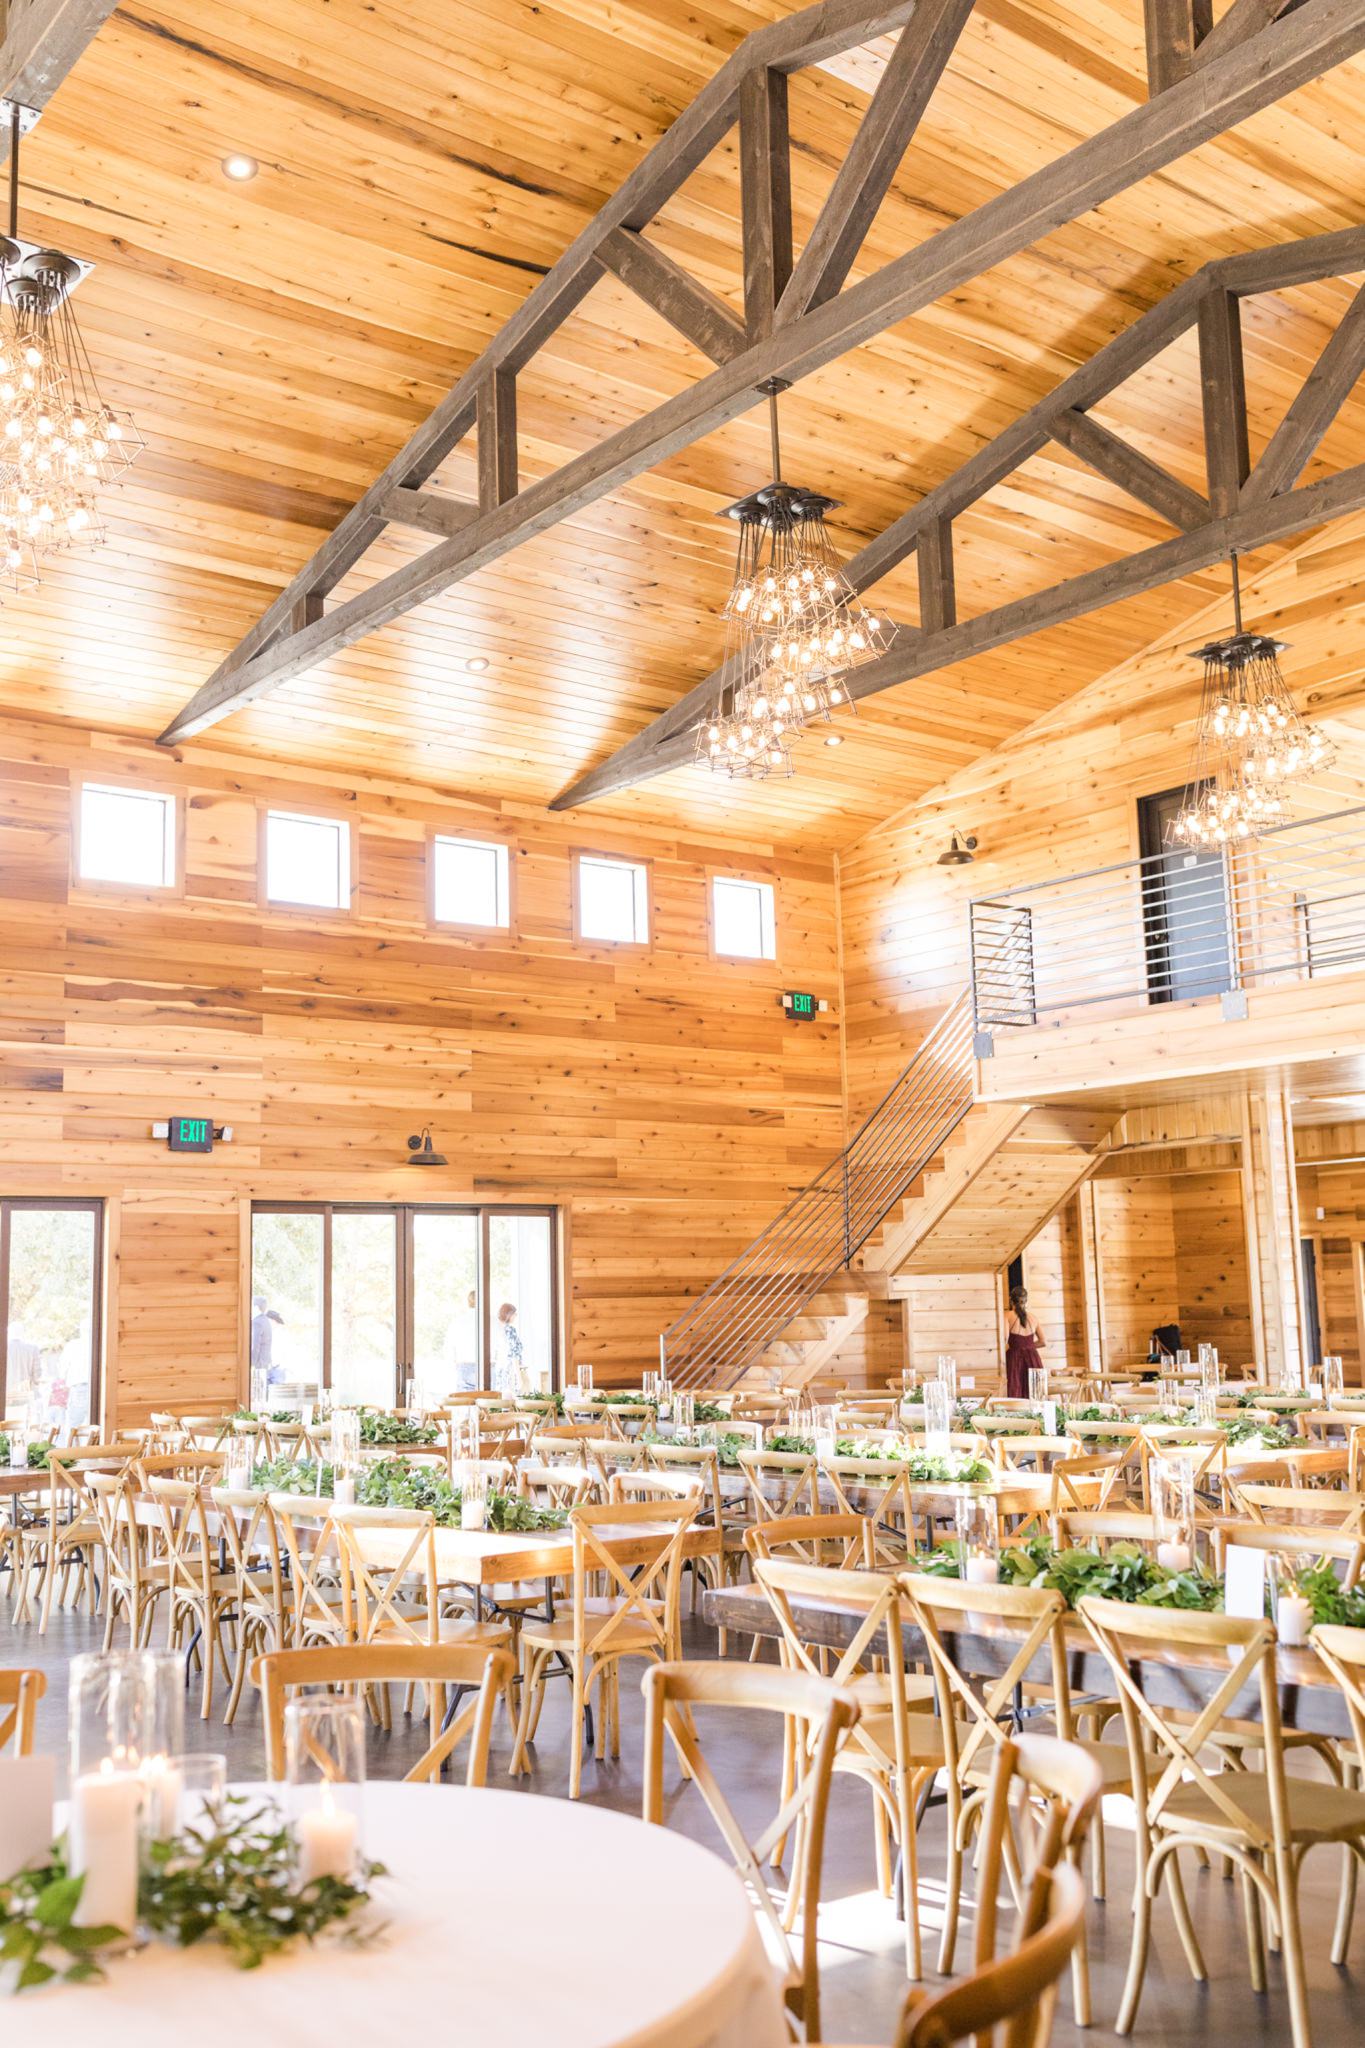 Wedding at The Barn at Swallows Eve | Shelby & Conner - Dawn Elizabeth ...